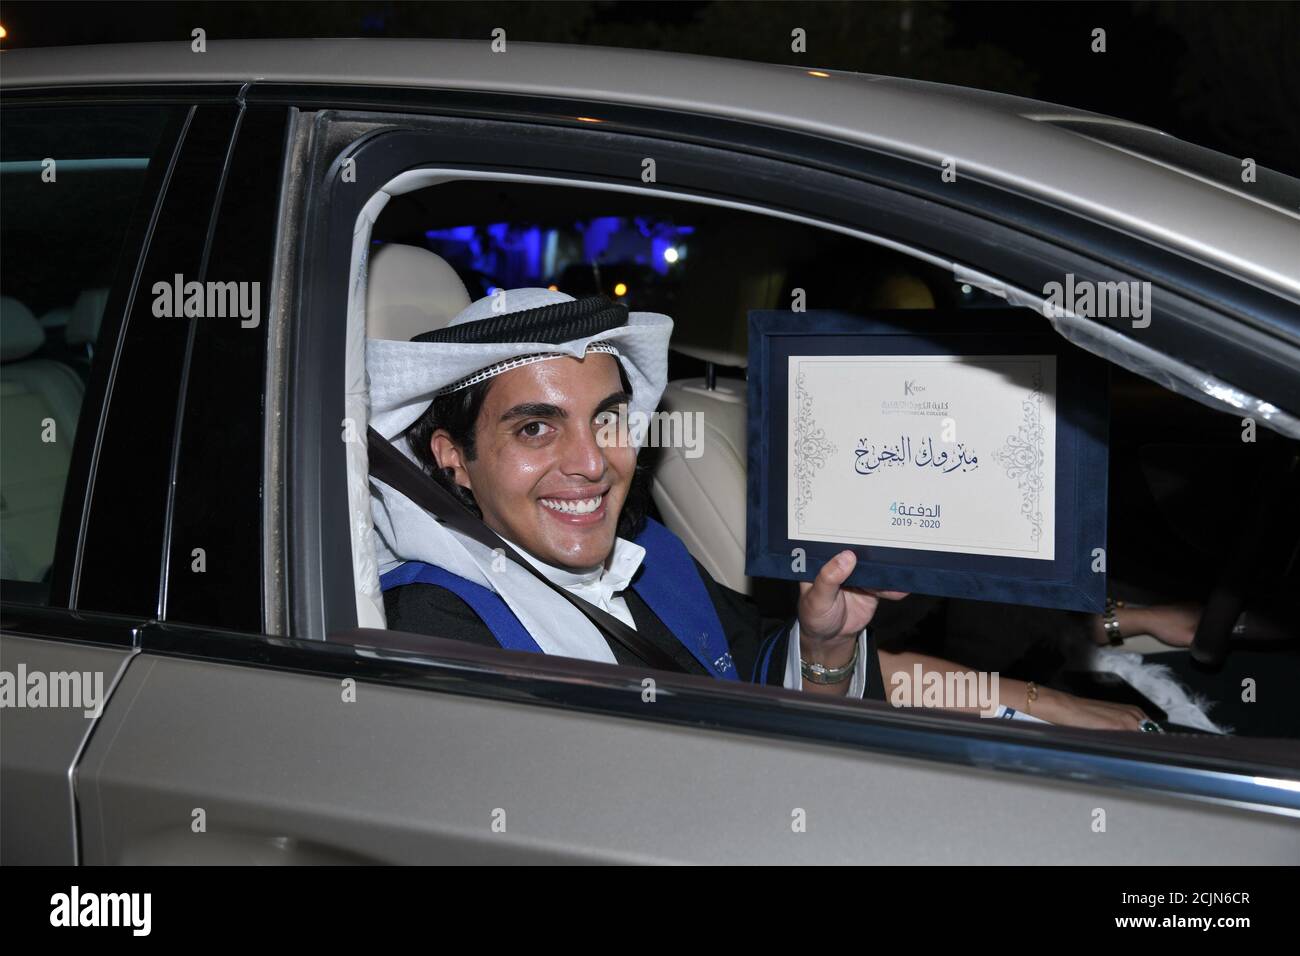 (200915) -- AHMADI GOVERNORATE, Sept. 15, 2020 (Xinhua) -- A student shows a diploma during a drive-through graduation ceremony at Kuwait Technical College (K-Tech) in Ahmadi Governorate, Kuwait, Sept. 9, 2020. Kuwait Technical College (K-Tech) celebrated its students' graduation in the first of its kind drive-through ceremony. More than 125 students gathered in the university's parking lot to receive their degree while driving-through to the president and keeping social distancing protocols in place. TO GO WITH 'Feature: Kuwaiti students celebrate graduation with drive-through, virtua Stock Photo